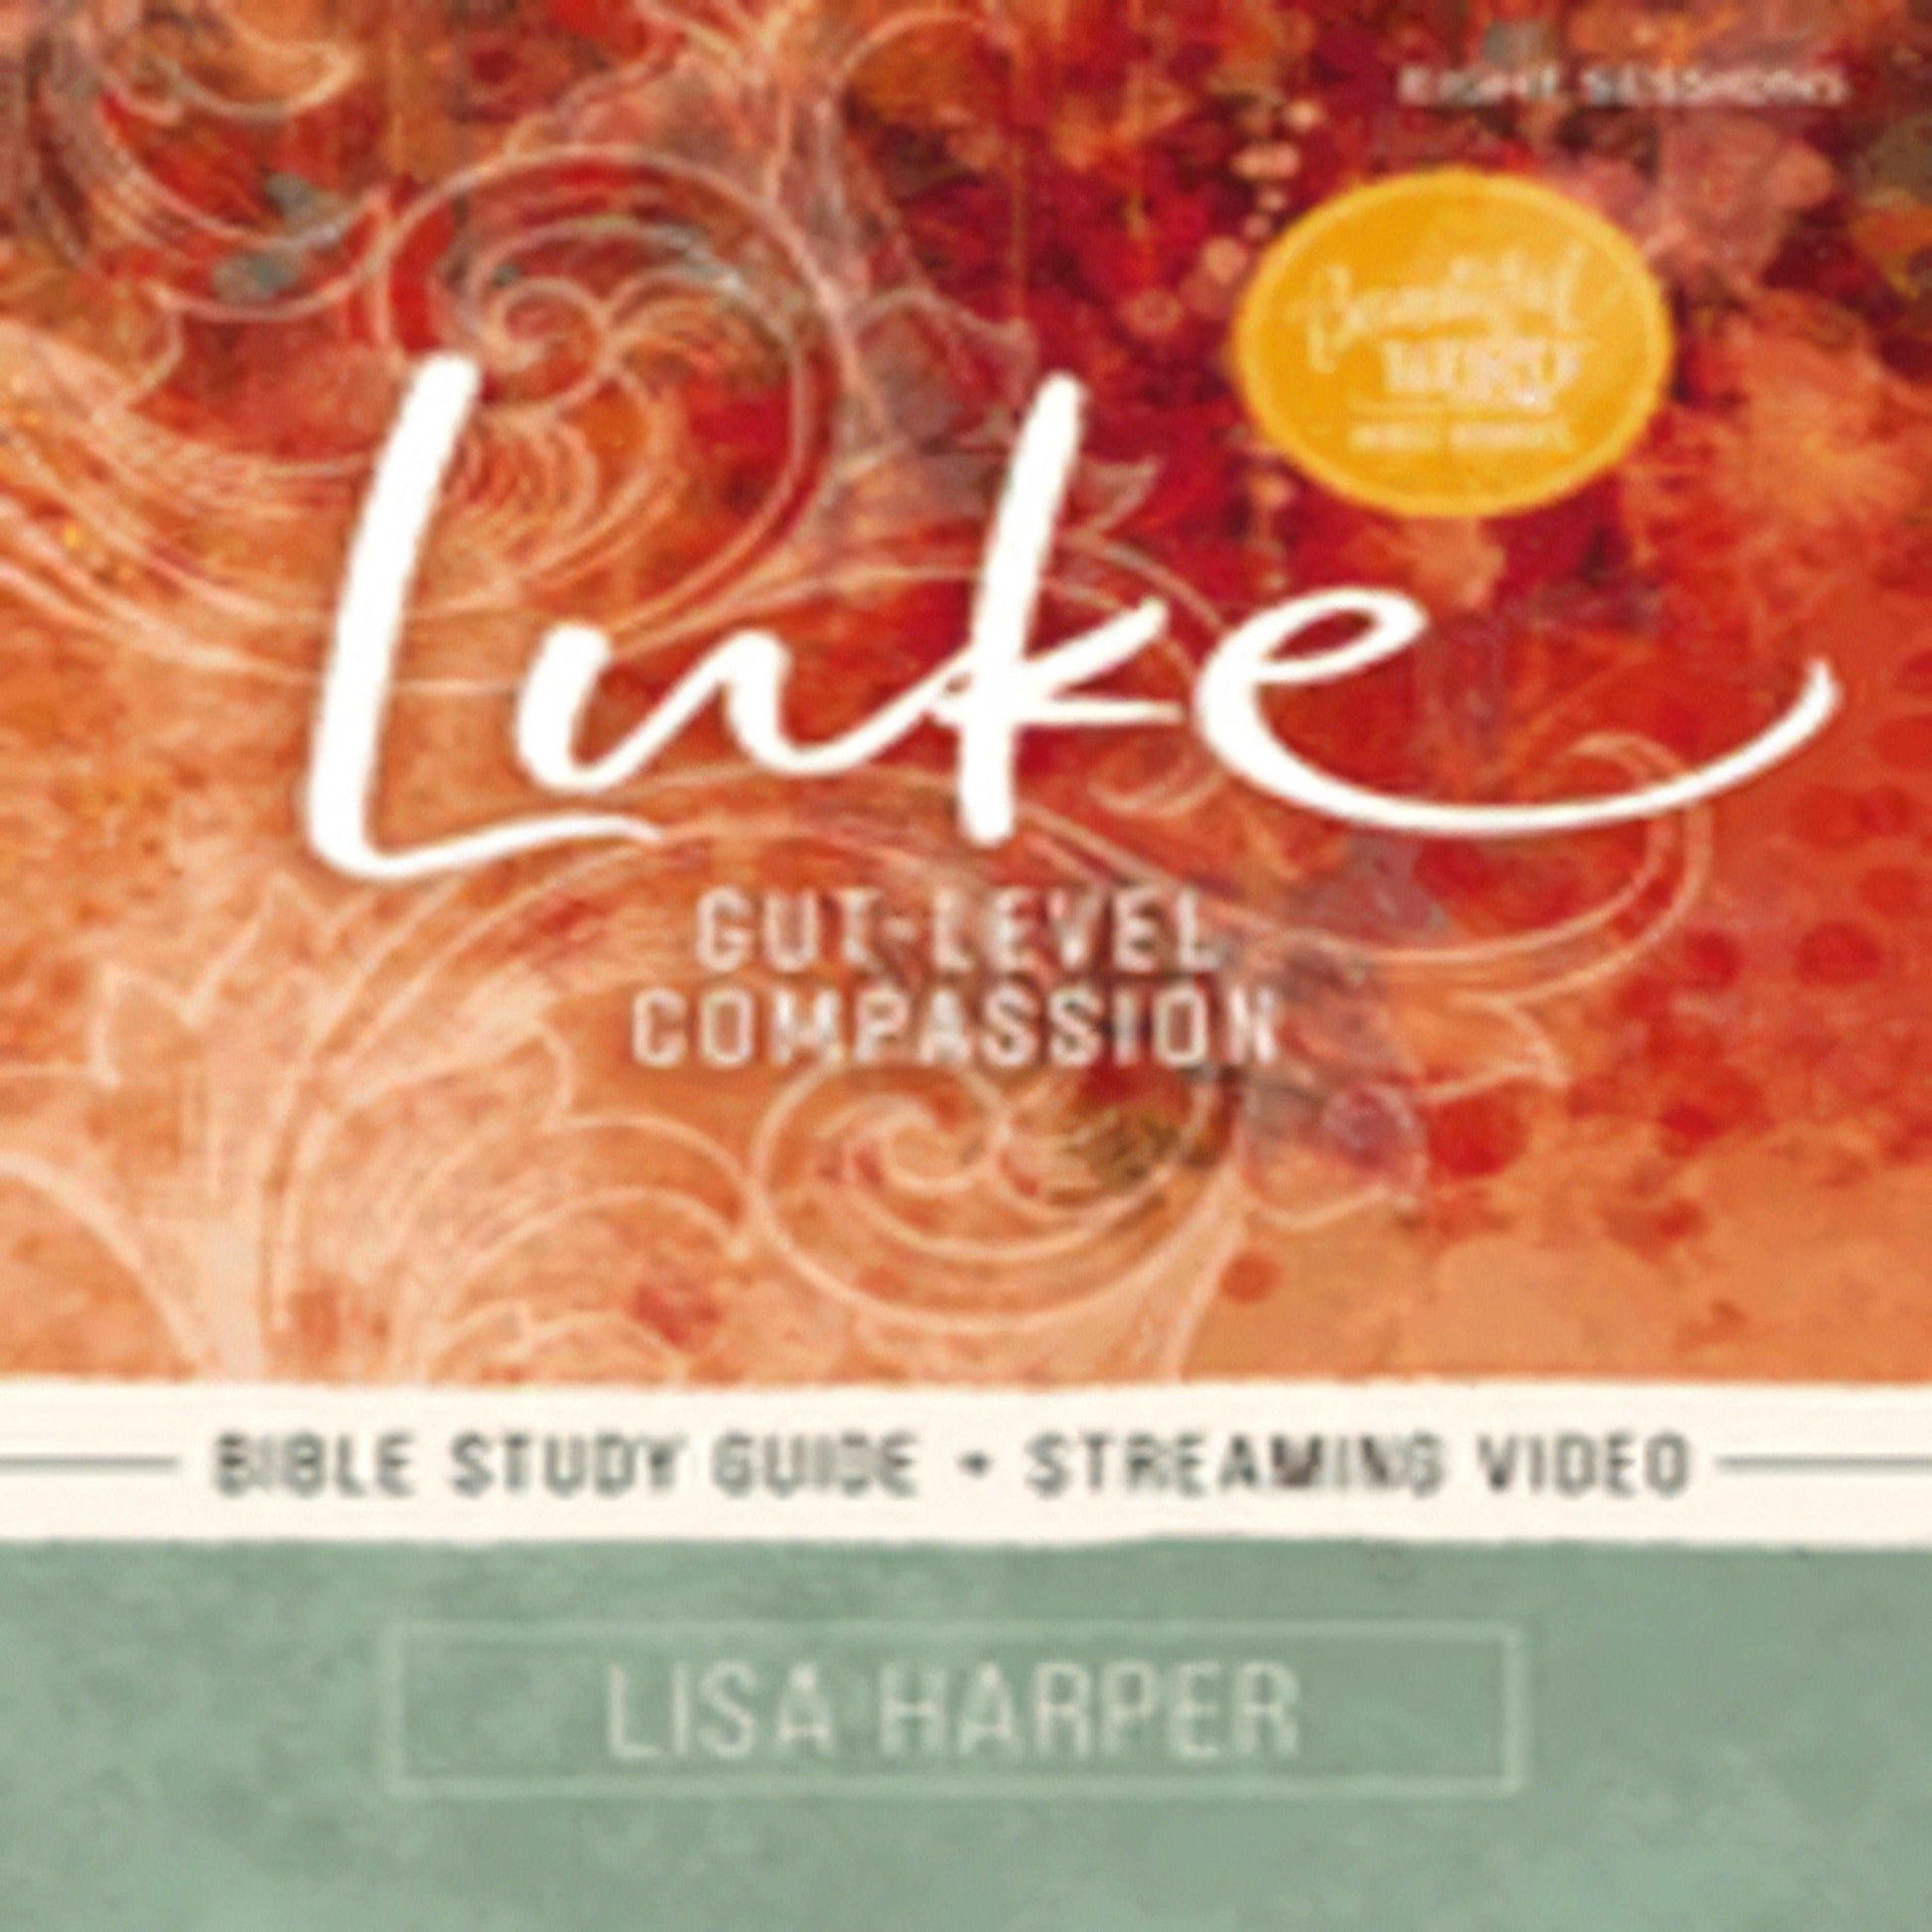 Luke Bible Study Guide Plus Streaming Video: Gut-Level Compassion (Beautiful Word Bible Studies) - Street Smart261-032023-0310141346DPGBOOKSTORE.COM. Today's Bestsellers.